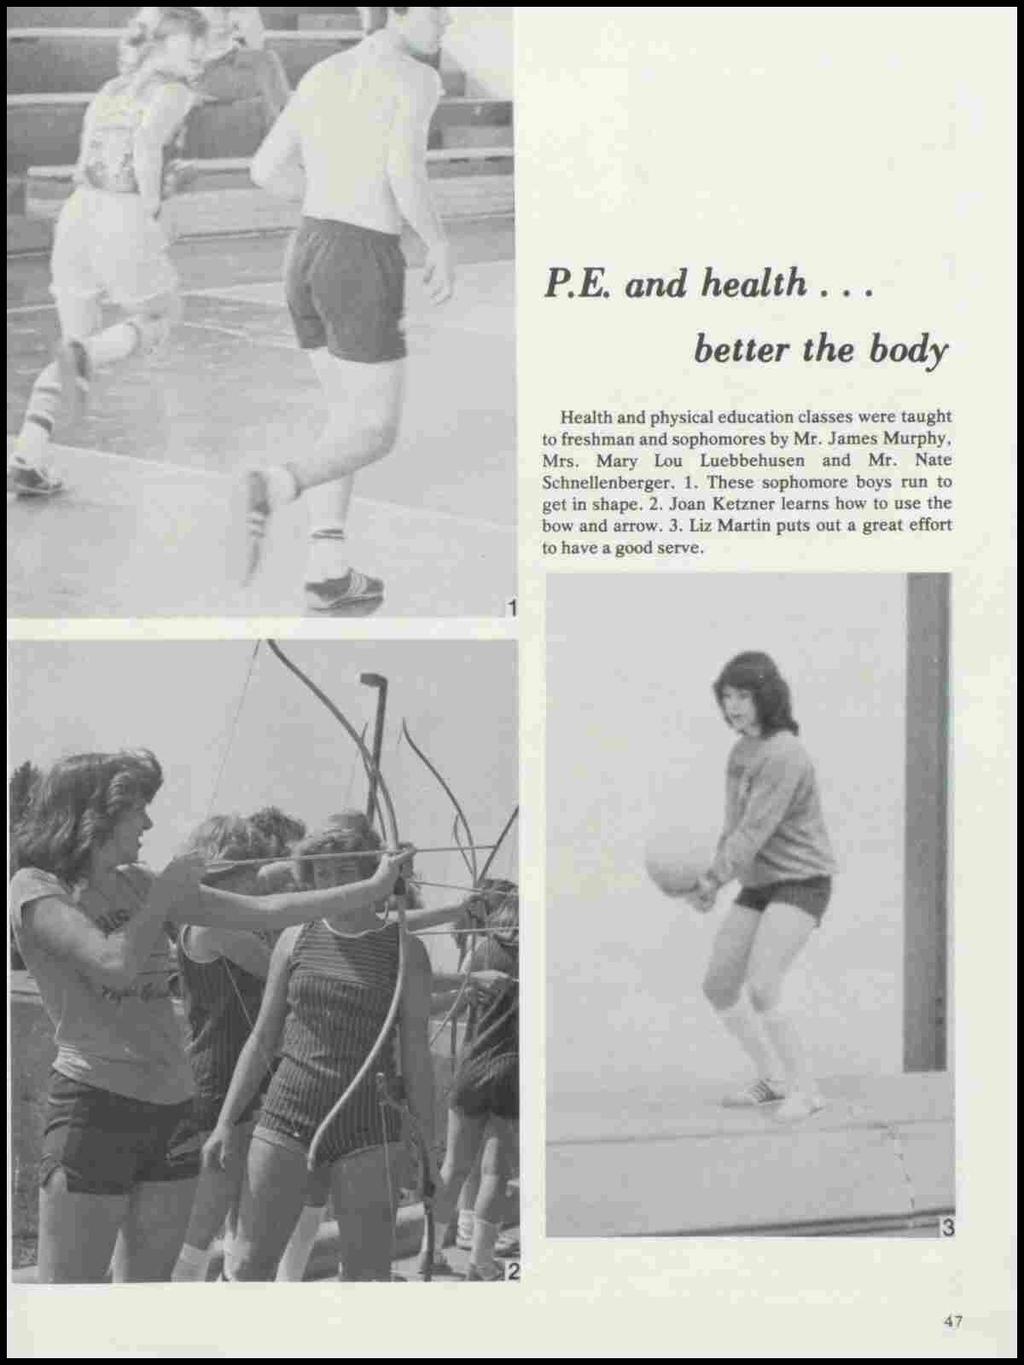 P.E. and health... better the body Health and physical education classes were taught to freshman and sophomores by Mr. James Murphy, Mrs. Mary Lou Luebbehusen and Mr.